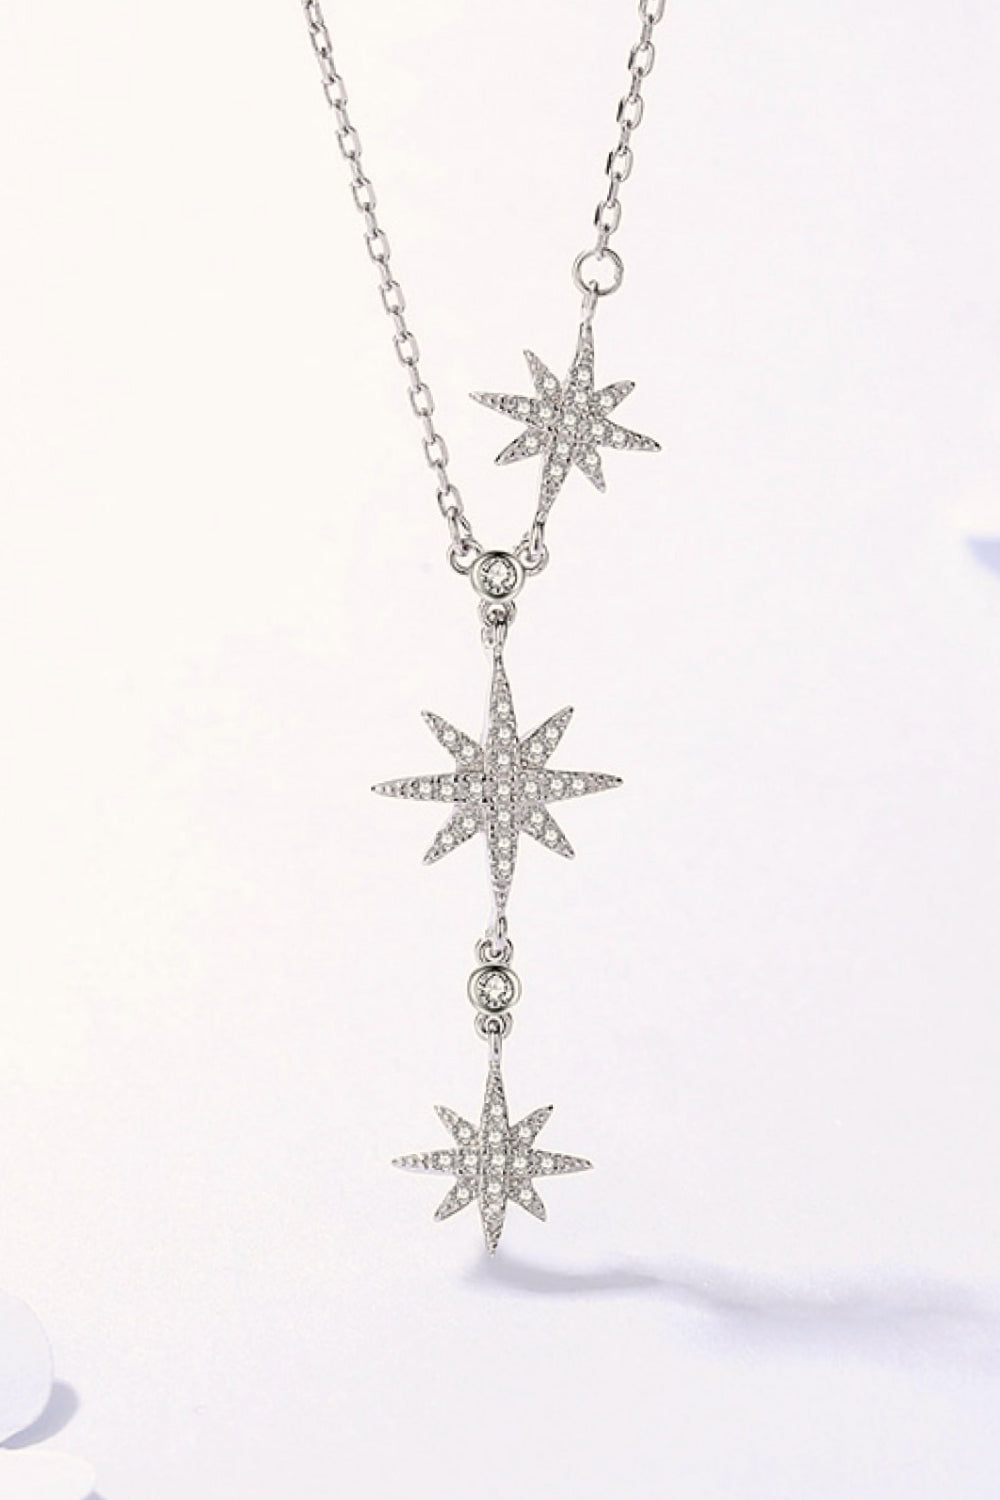 Think Celestial 925 Sterling Silver 3 Star Drop Pendant Necklace